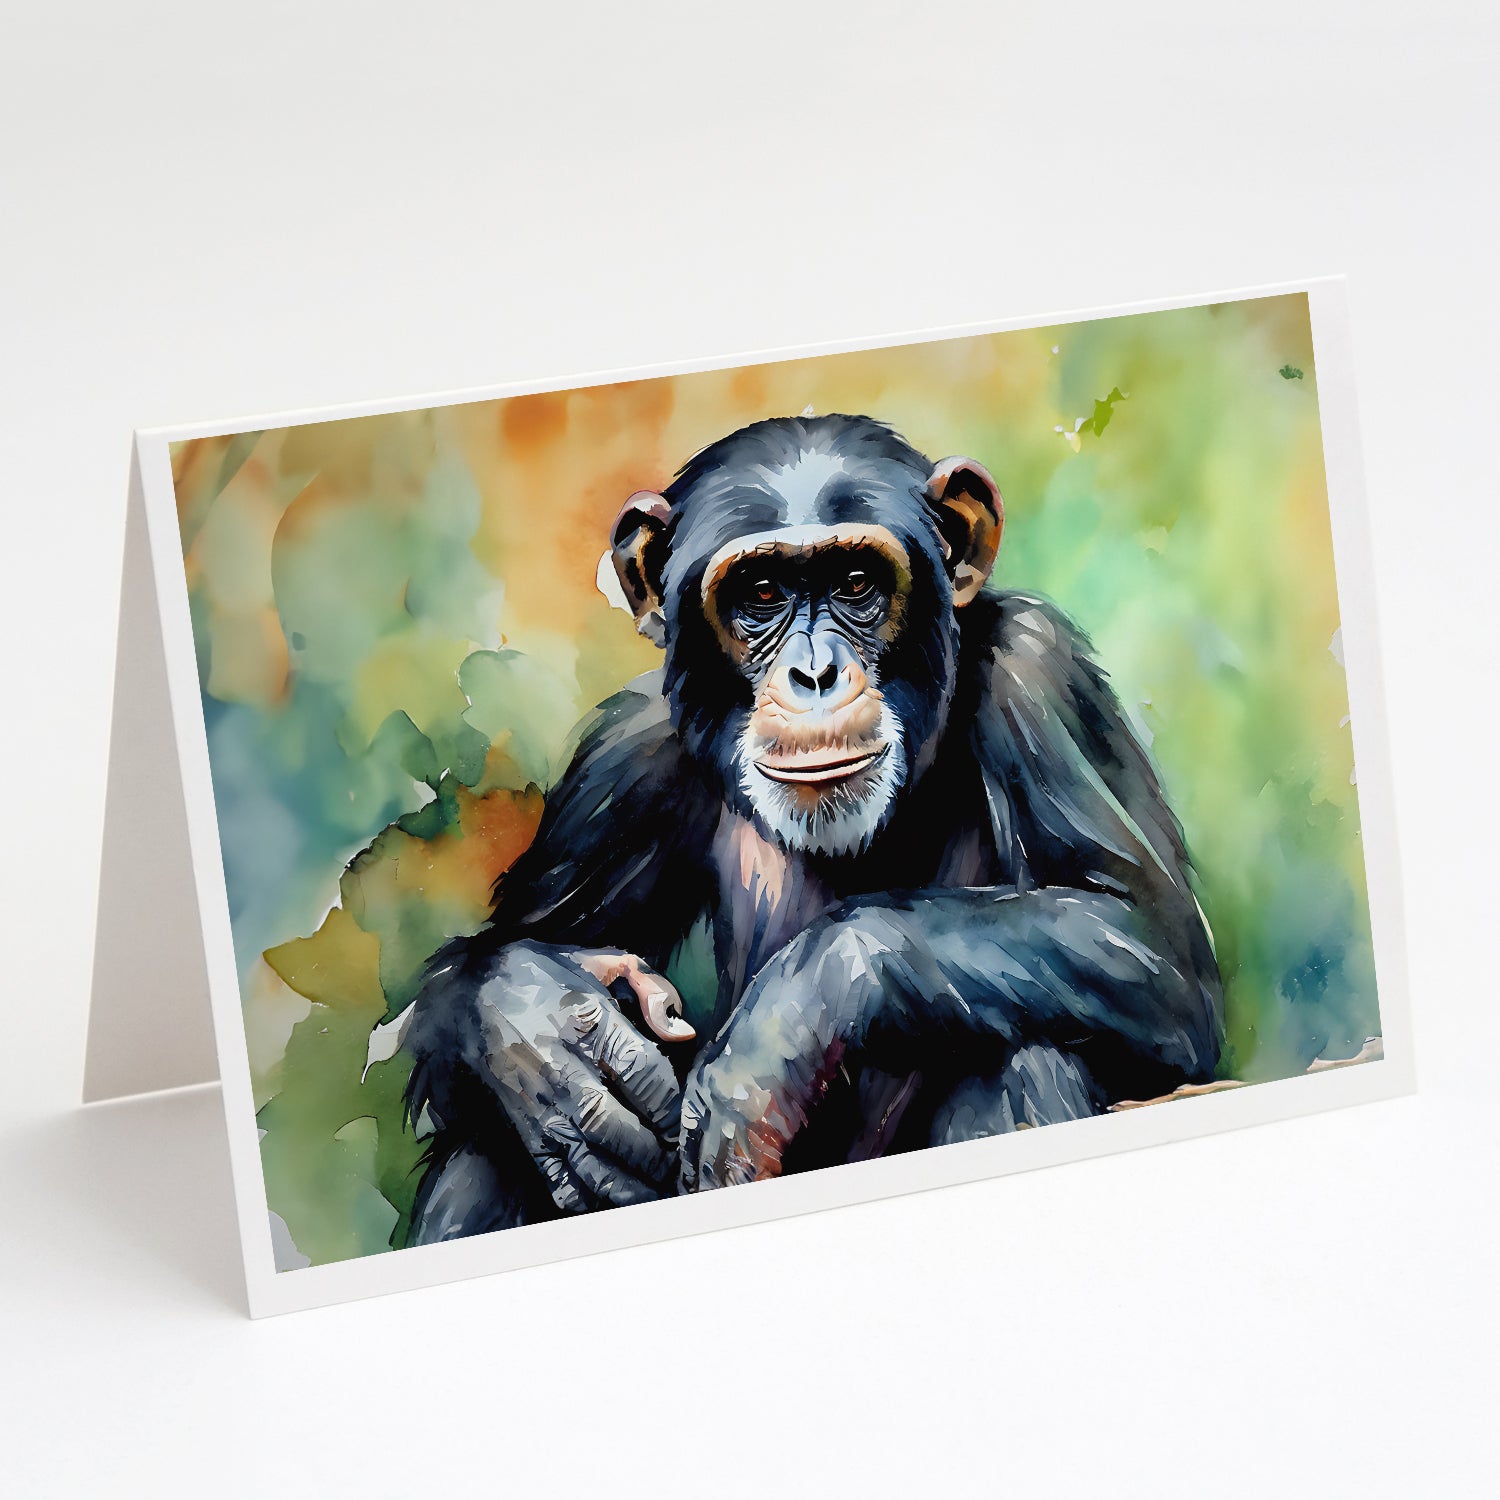 Buy this Chimpanzee Greeting Cards Pack of 8